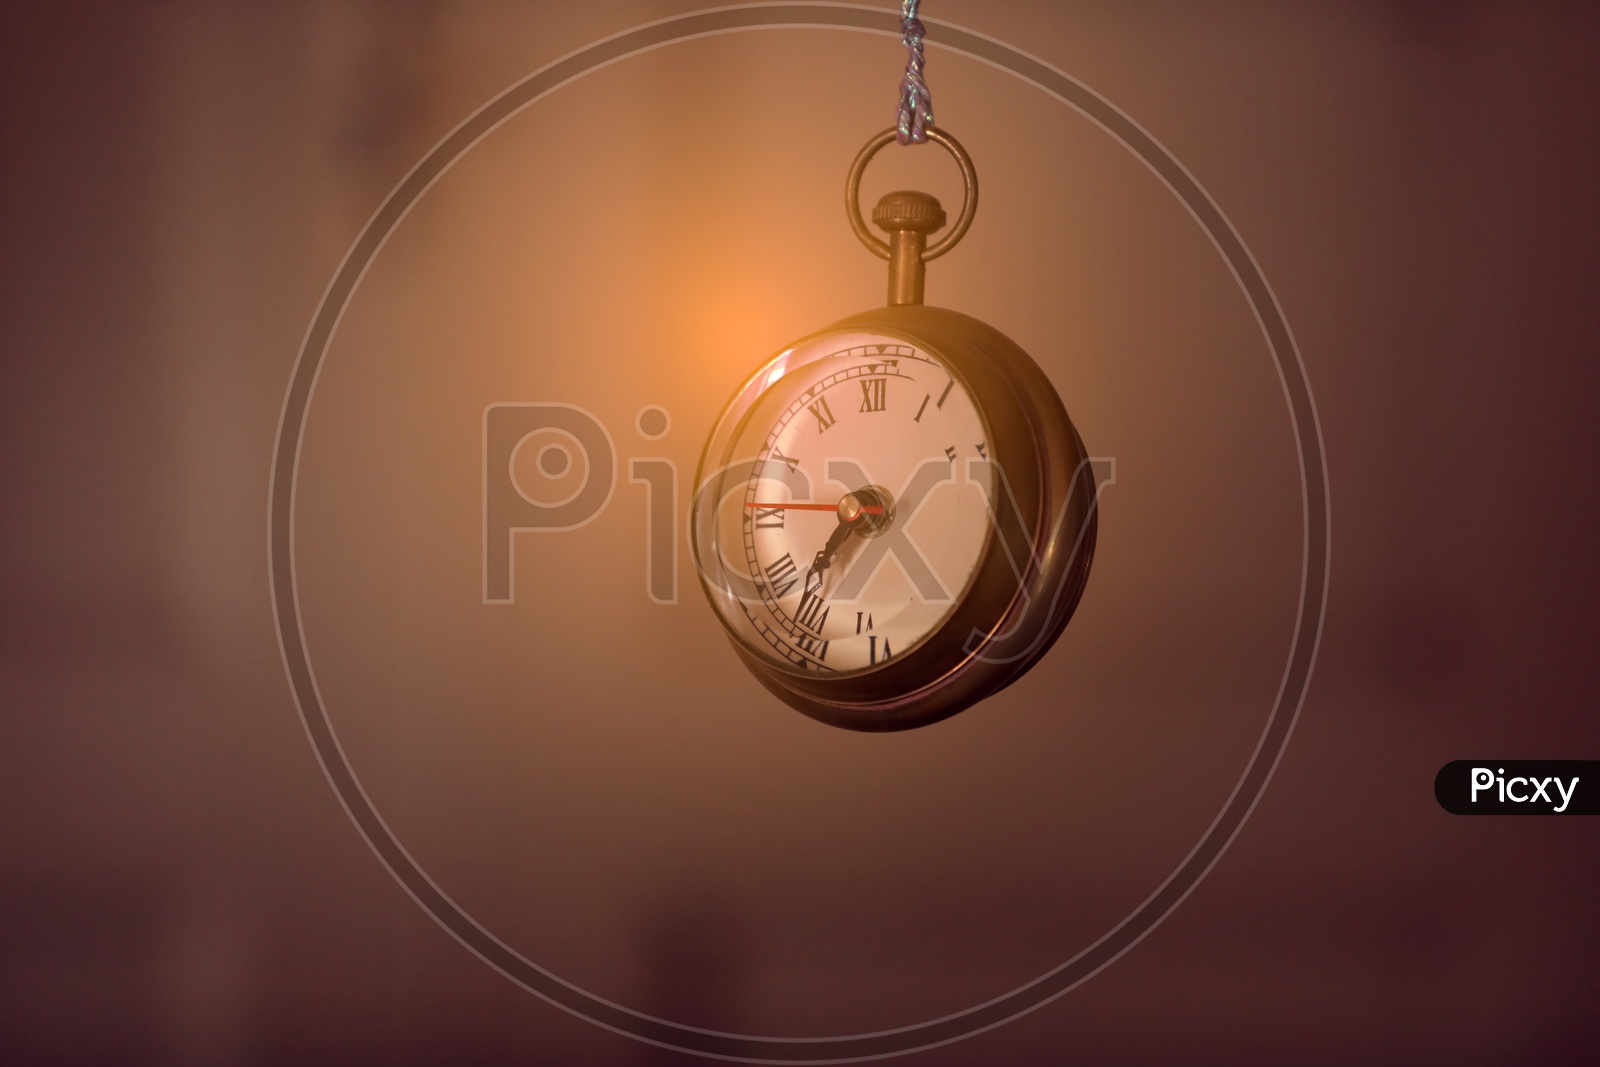 Pocket Watch Hanging Over a Isolated Background